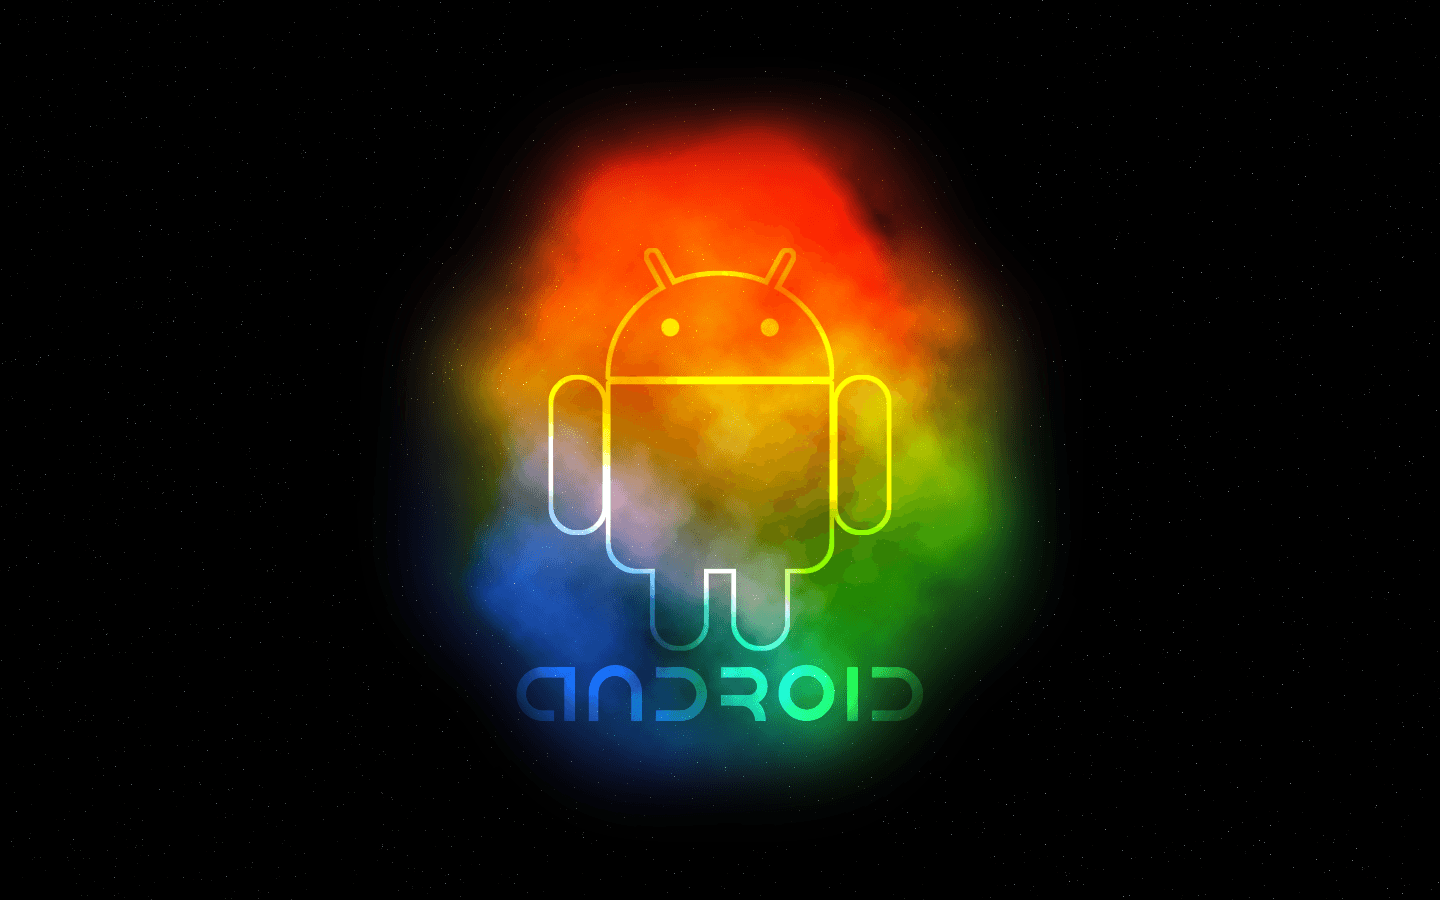 Cool Android Background 36758 High Resolution. download all free jpeg